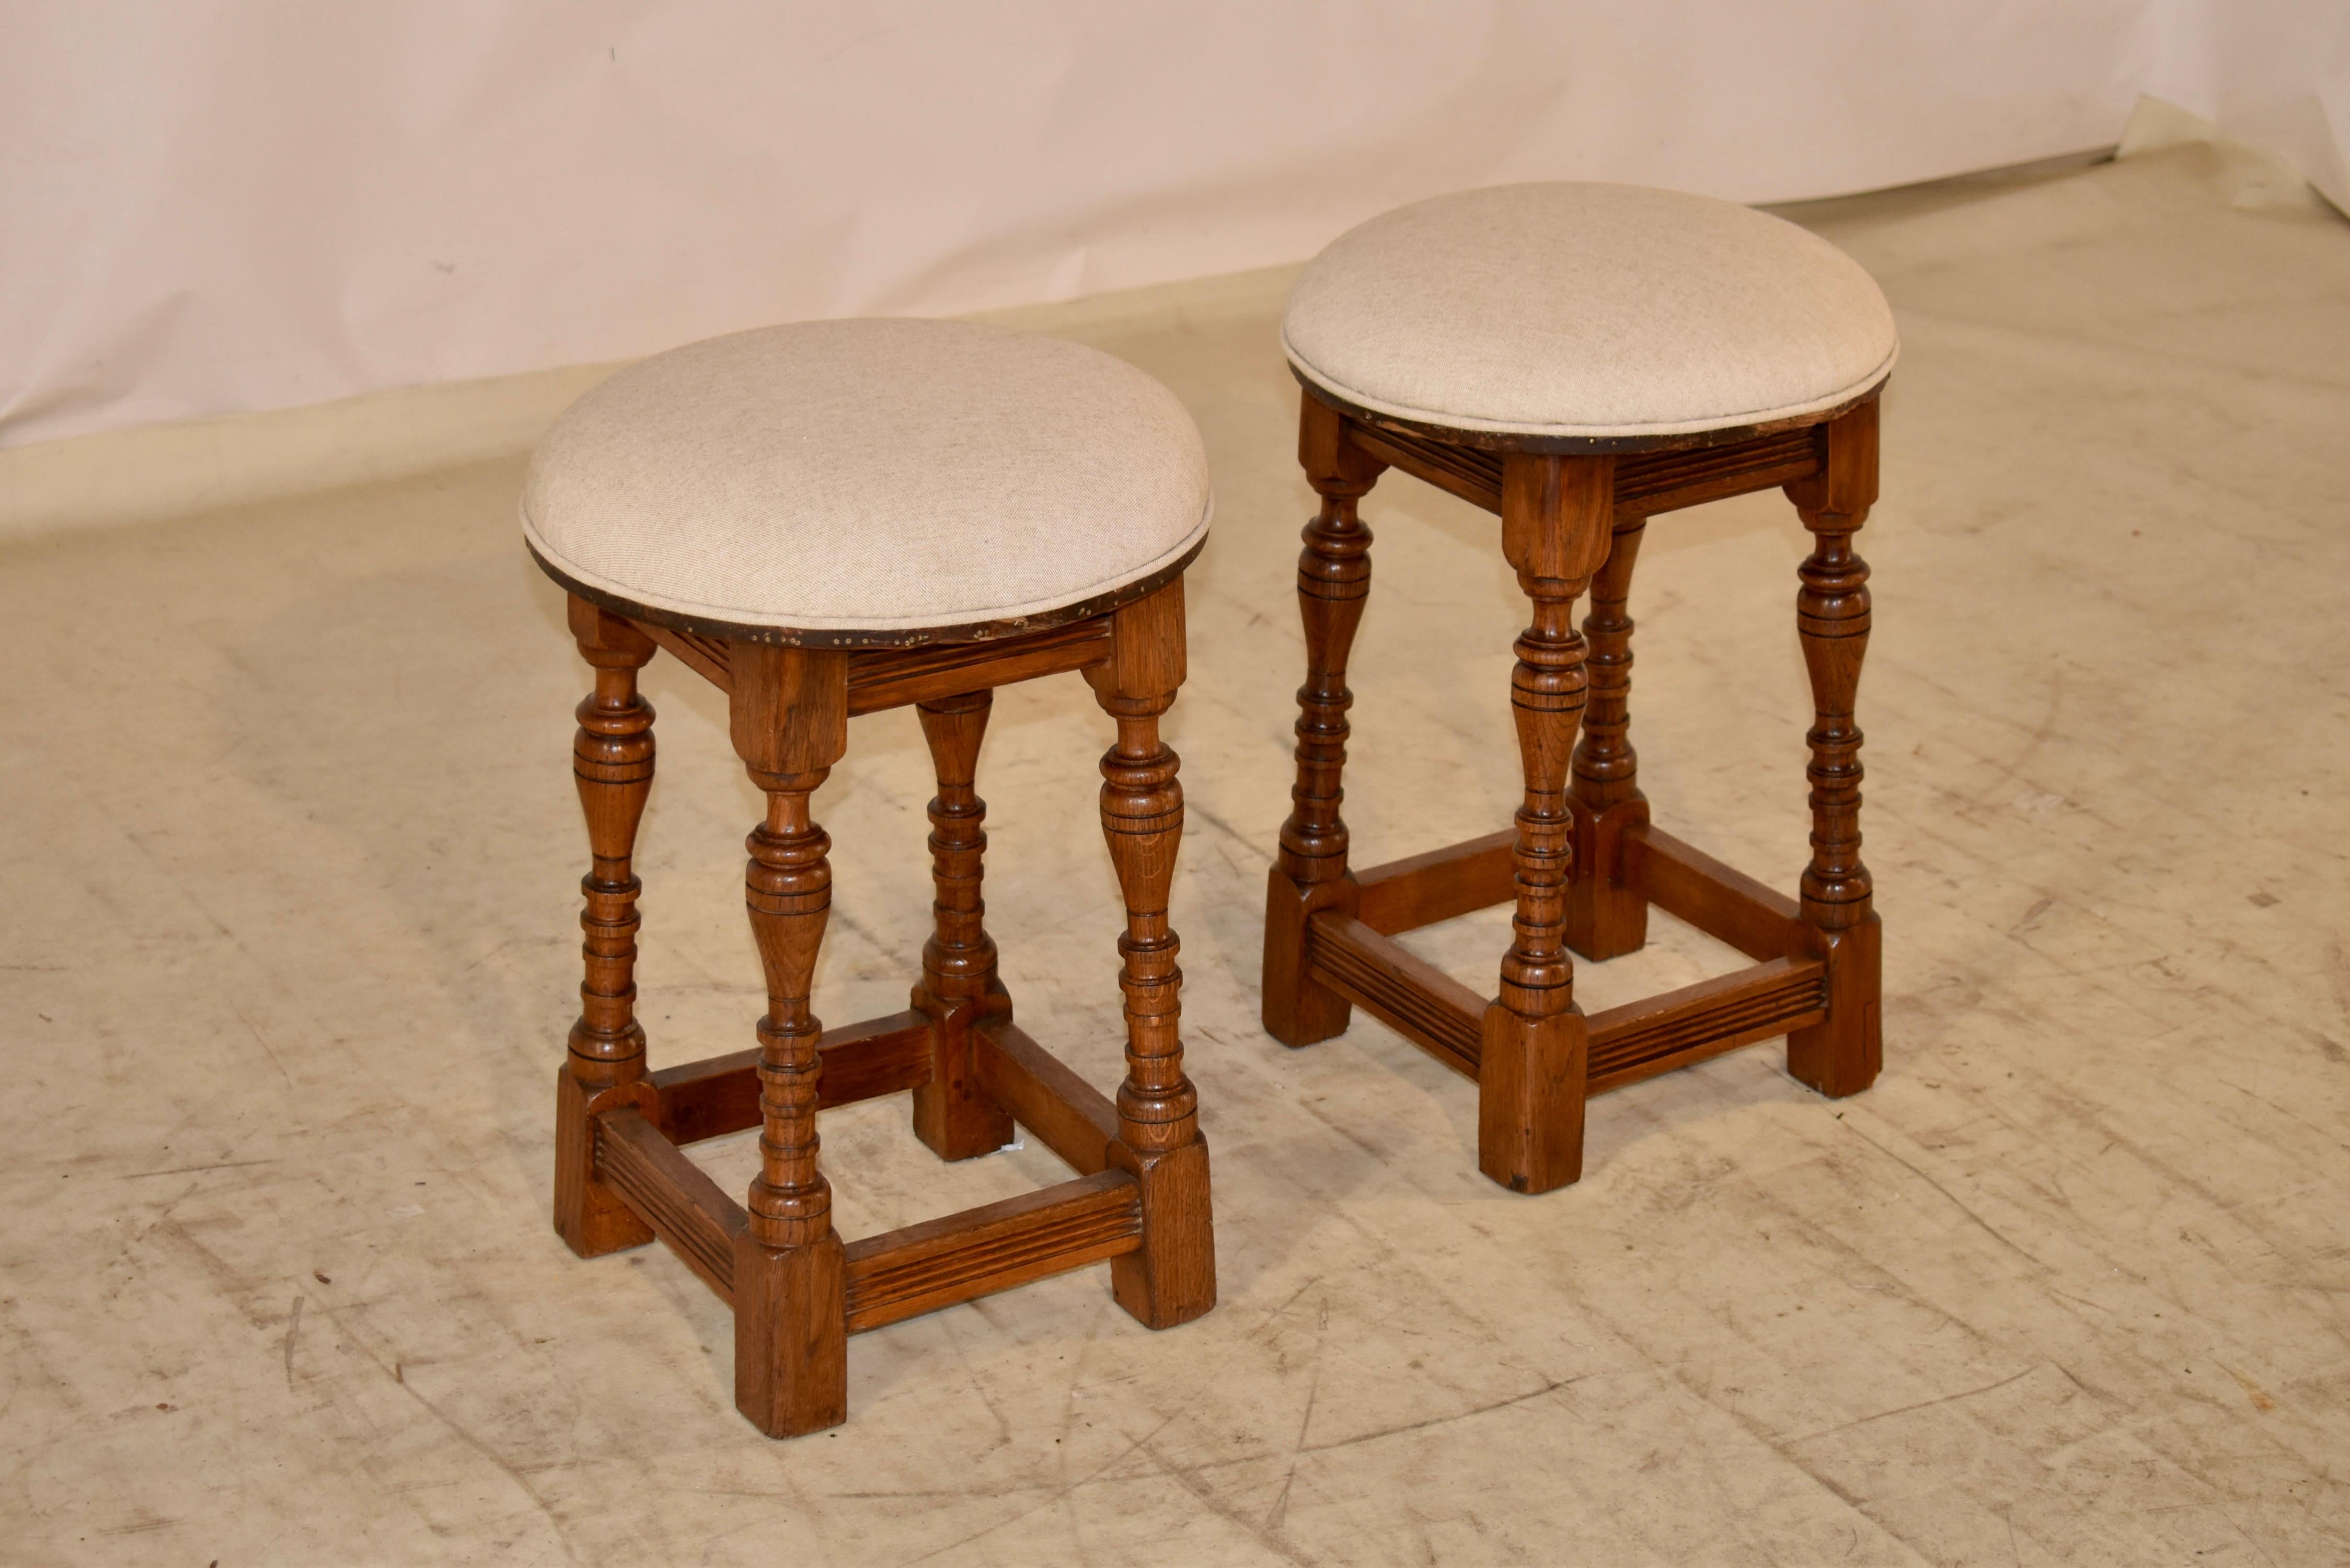 Turned Pair of Edwardian English Upholstered Stools For Sale